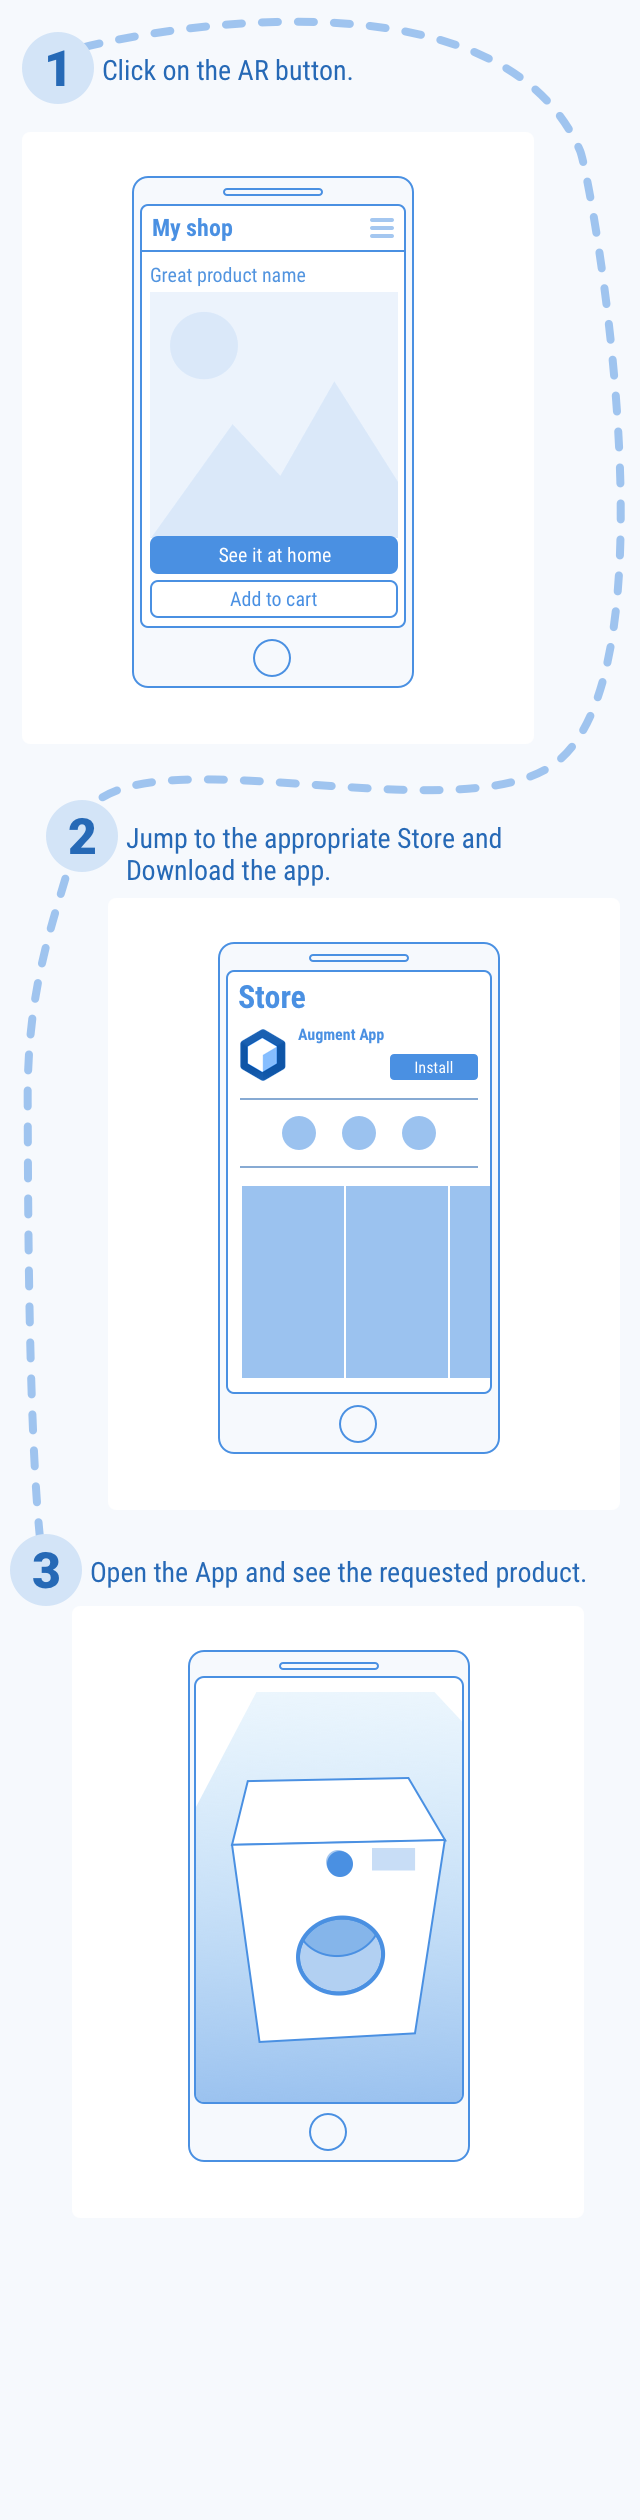 the user flow from a mobile website to downloading the Augment app then the product view in augmented reality